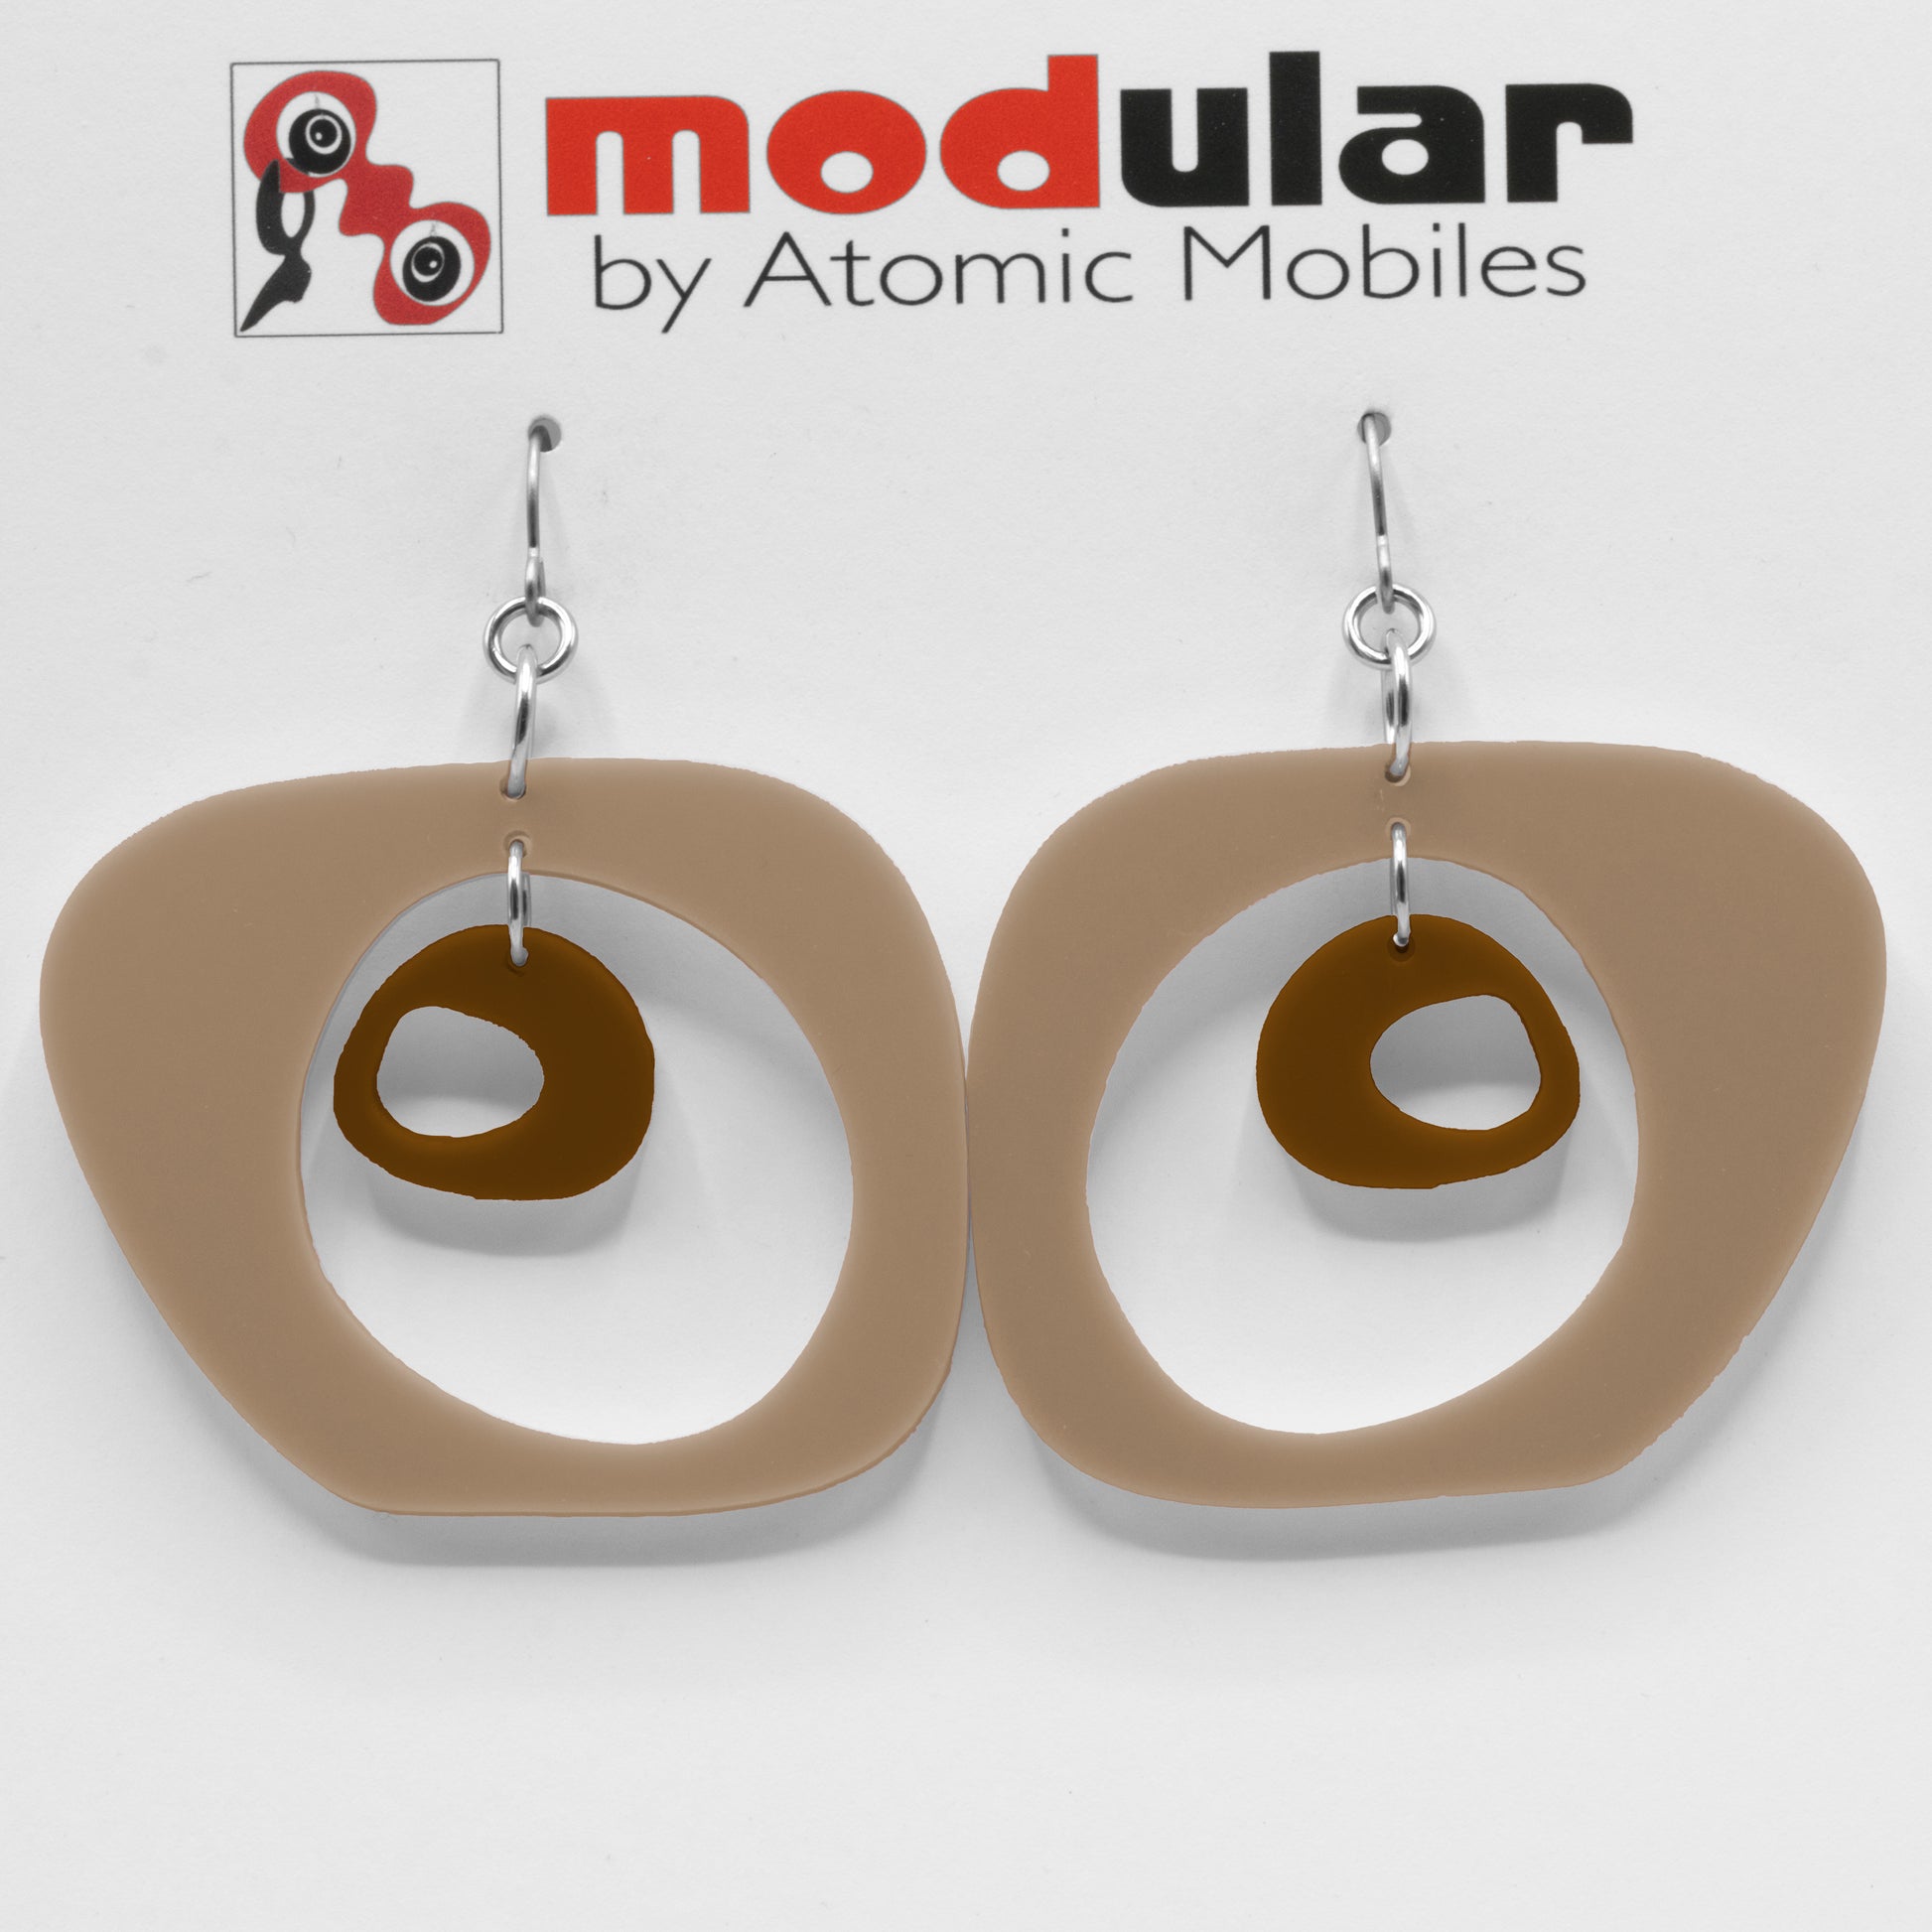 MODular Earrings - Paris Statement Earrings in Beige Tan and Brown by AtomicMobiles.com - retro era inspired mod handmade jewelry